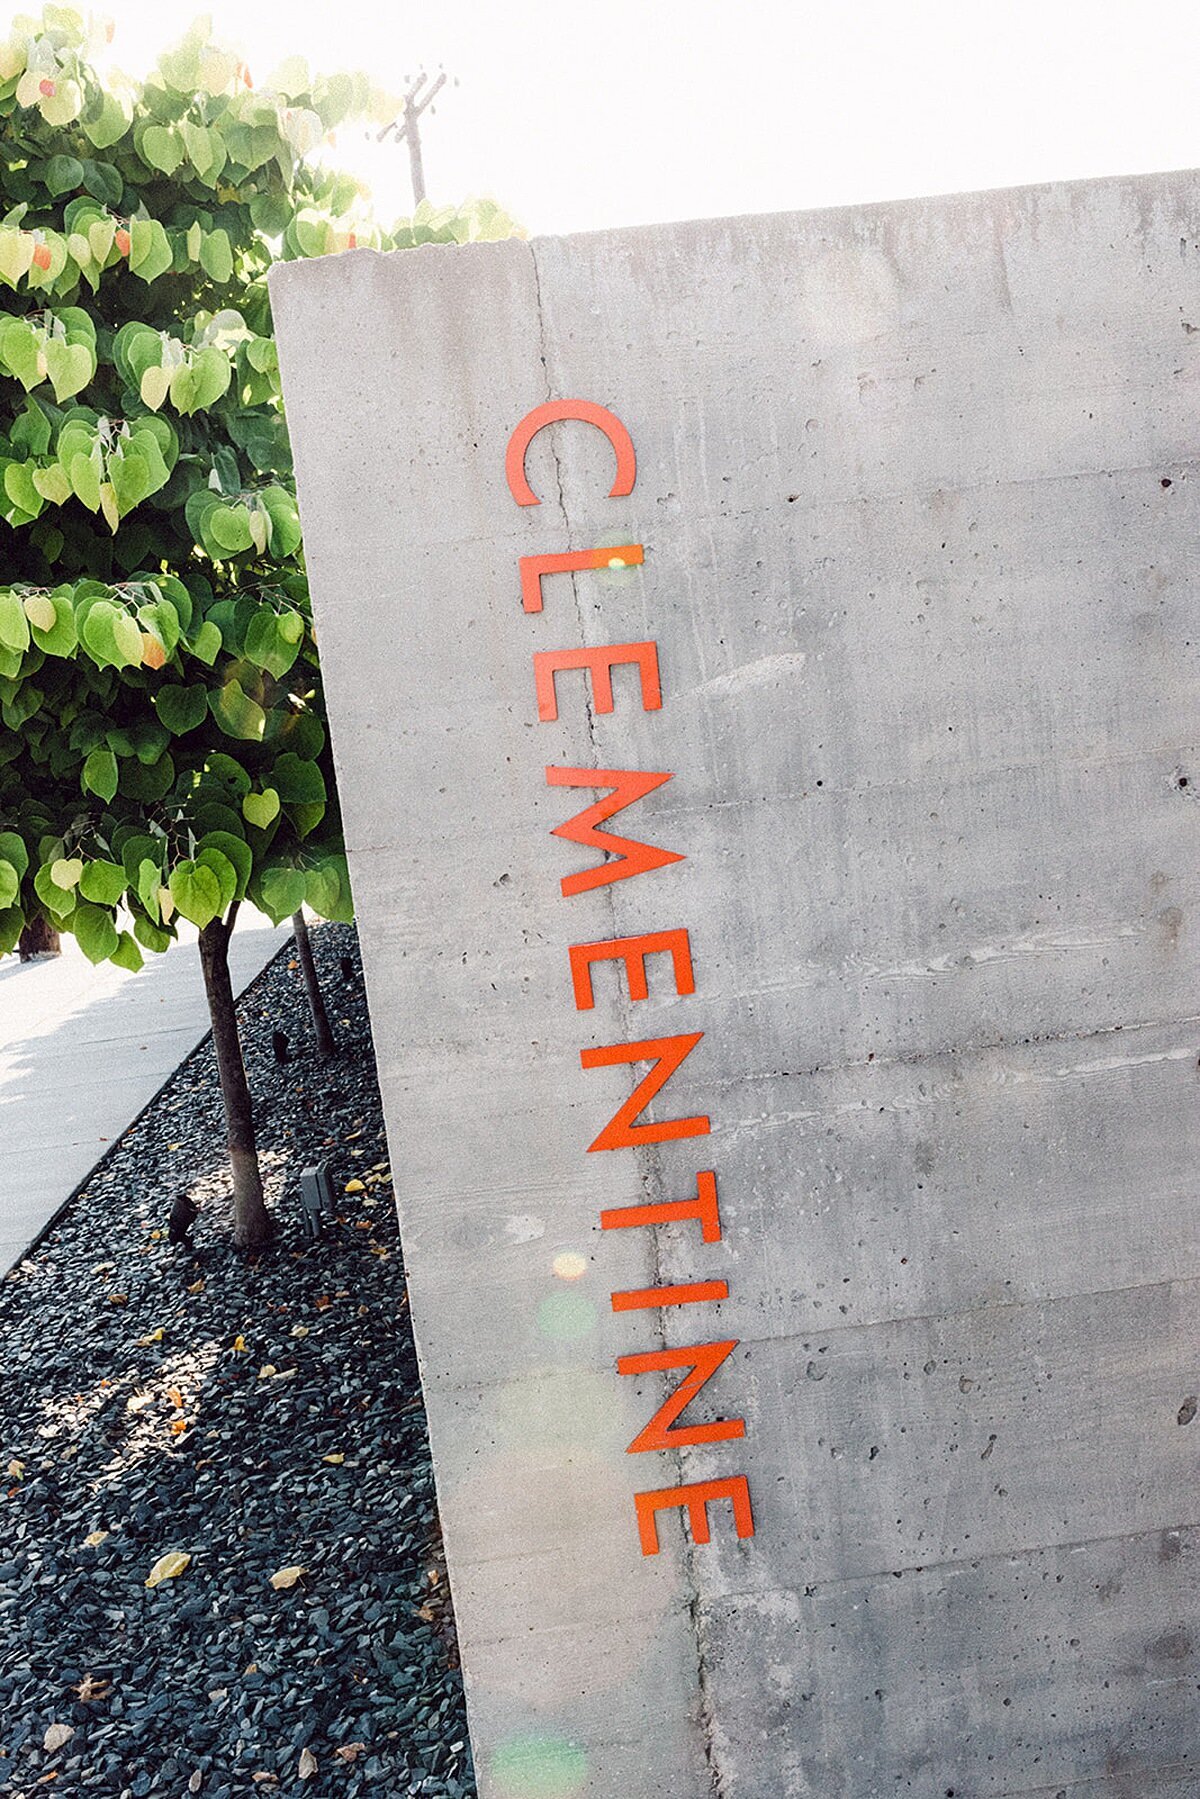 Gray concrete entryway to Clementine Hall in Nashville Tennessee with the word Clementine written in orange.